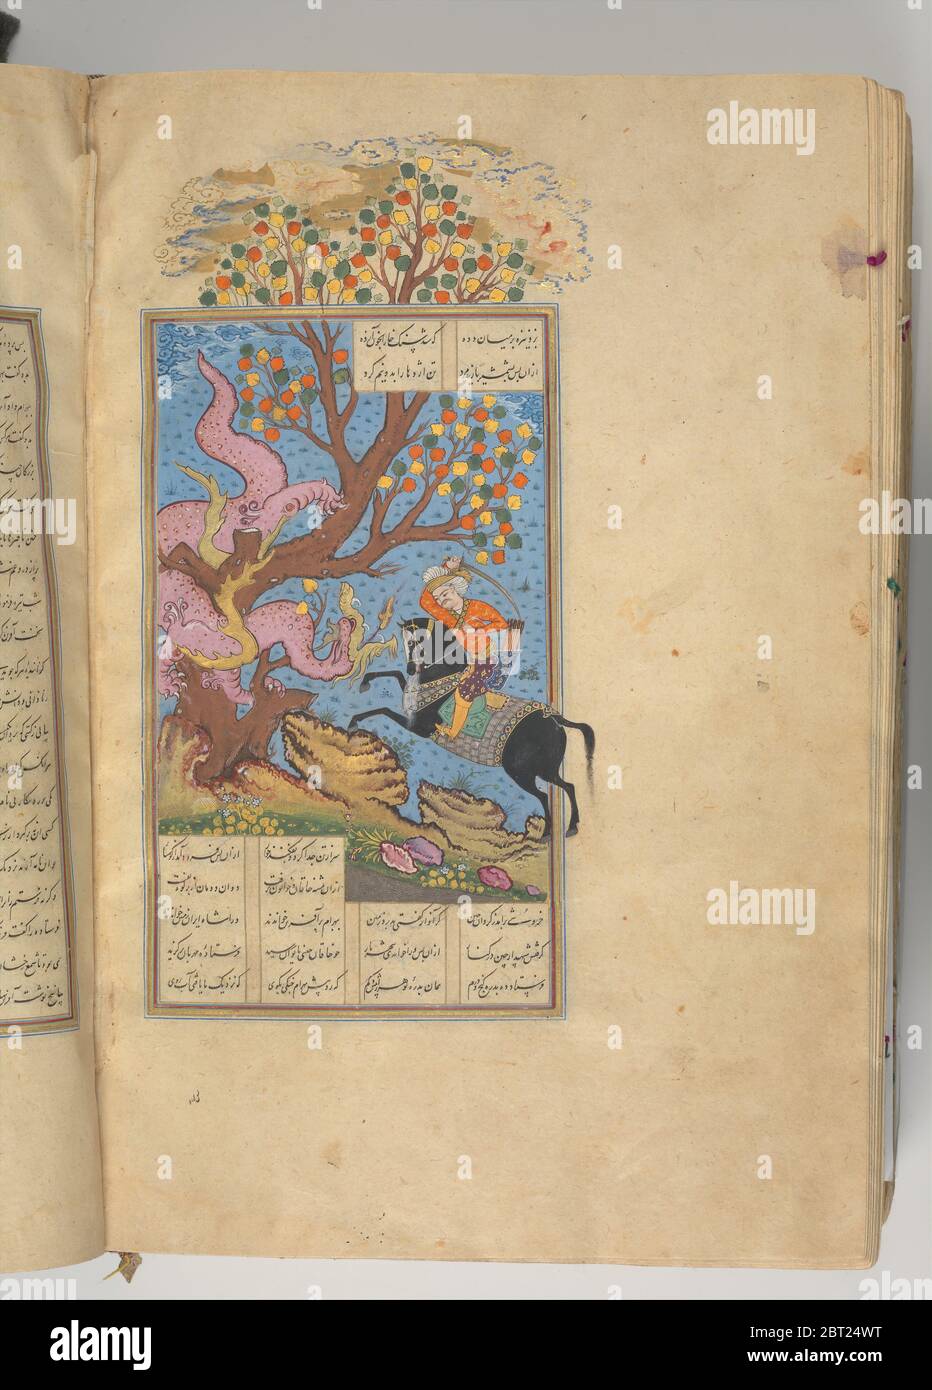 Shahnama (Book of Kings) of Firdausi, A.H. 1014/A.D. 1605-7. Stock Photo